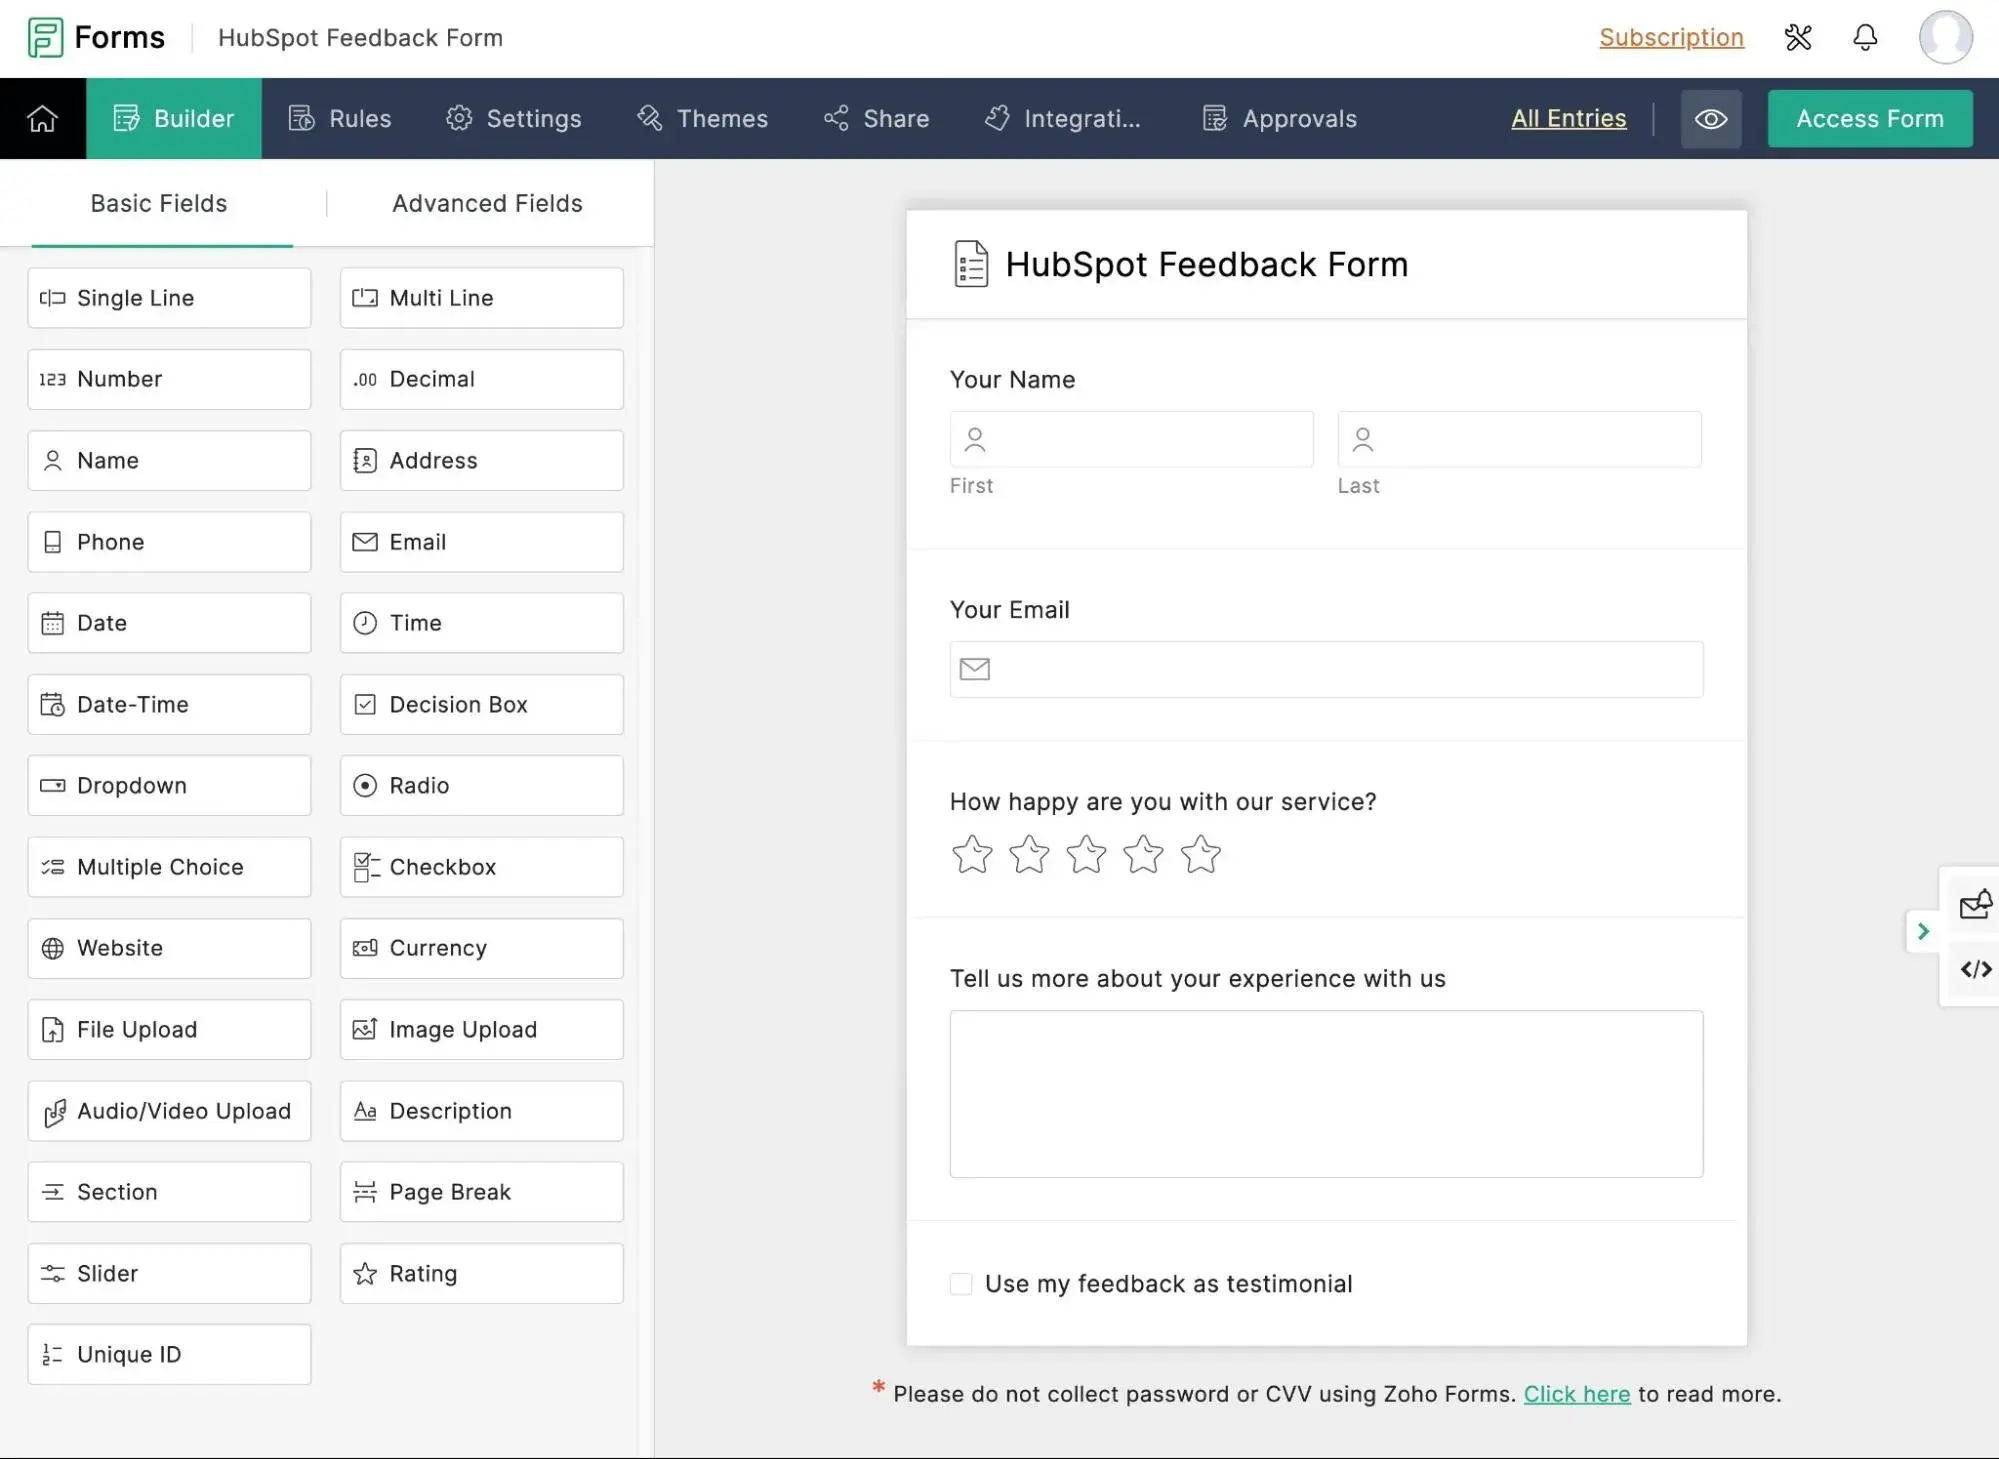 The Zoho Forms interface